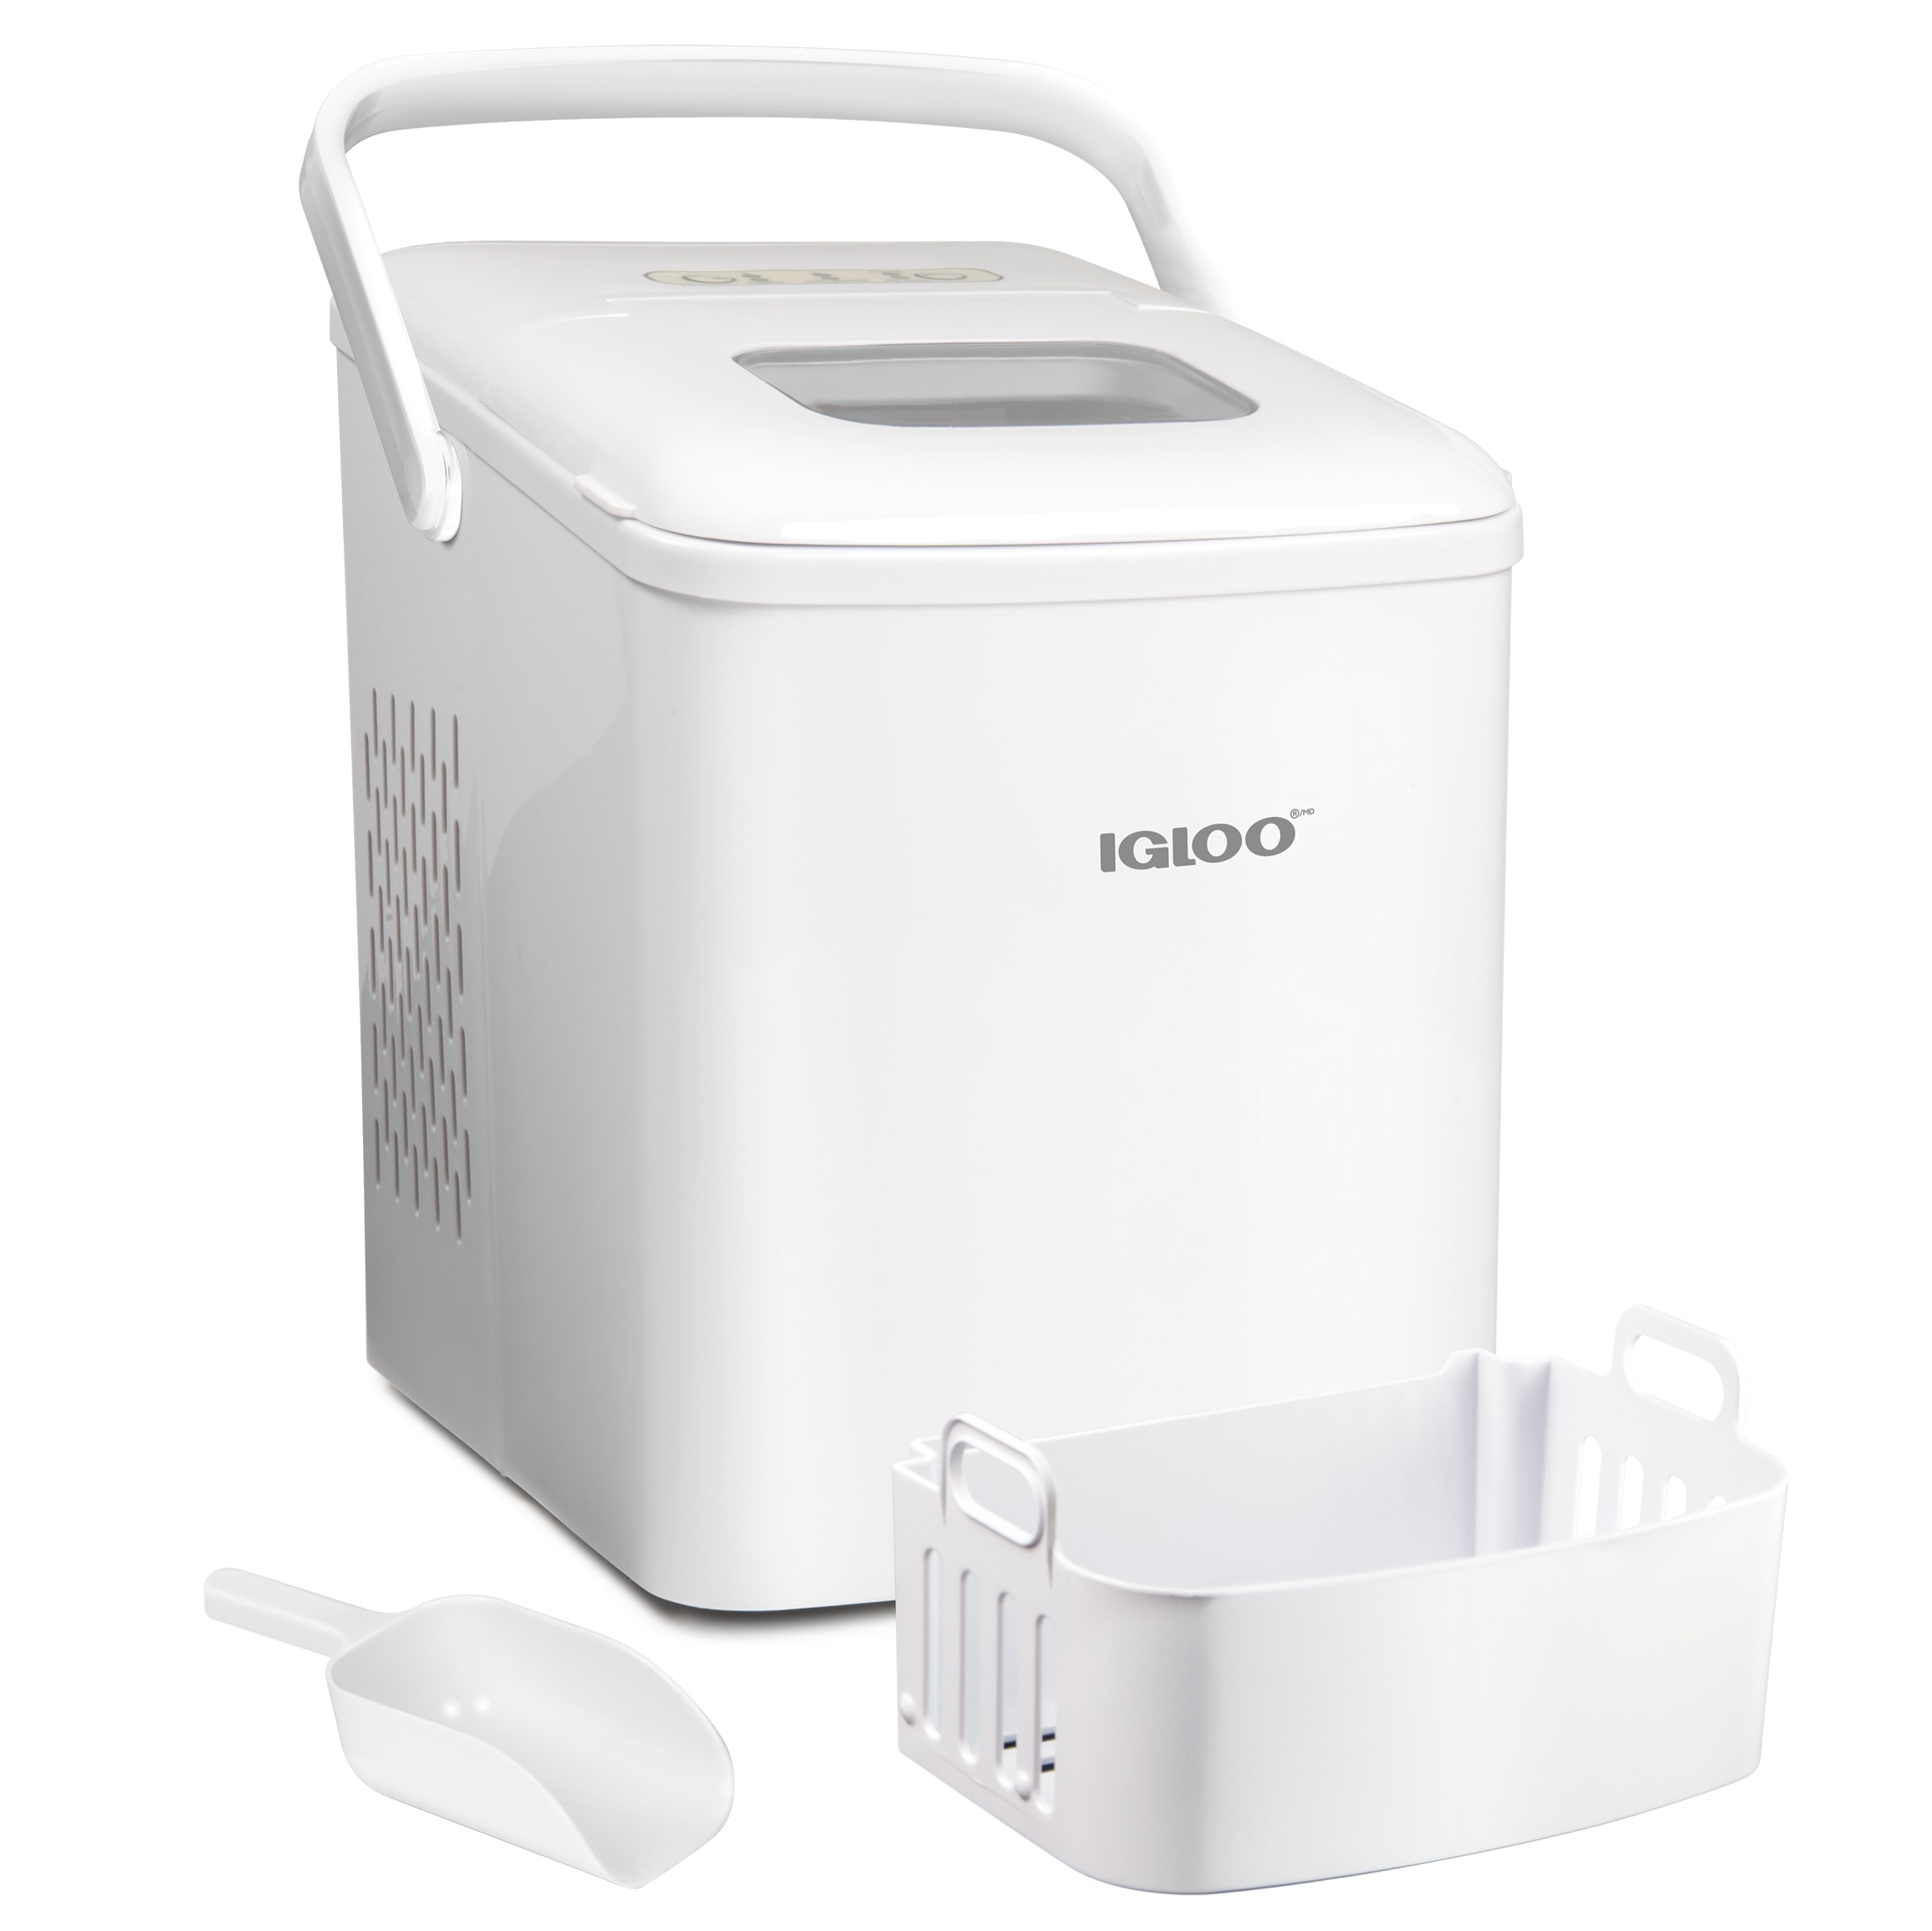 $119.99 - Igloo Ice Maker With Scoop and Basket - Stainless Steel White –  Môdern Space Gallery